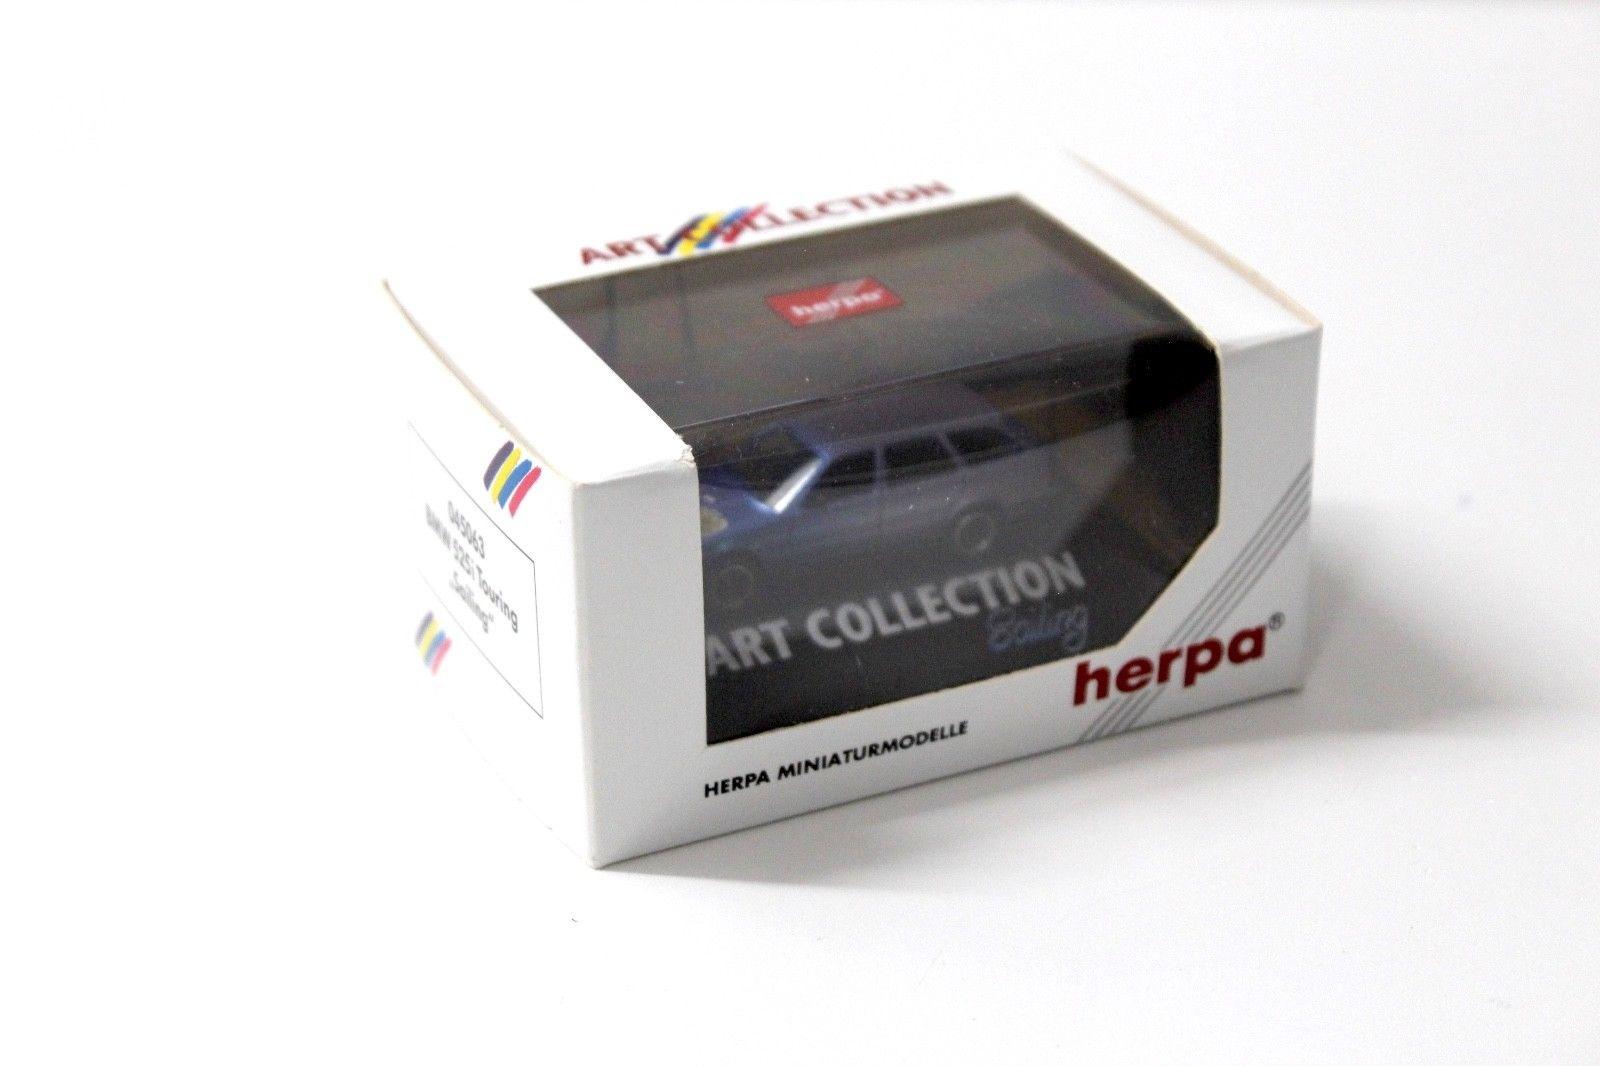 1:87 Herpa BMW 525i Touring SAILING Art Collection